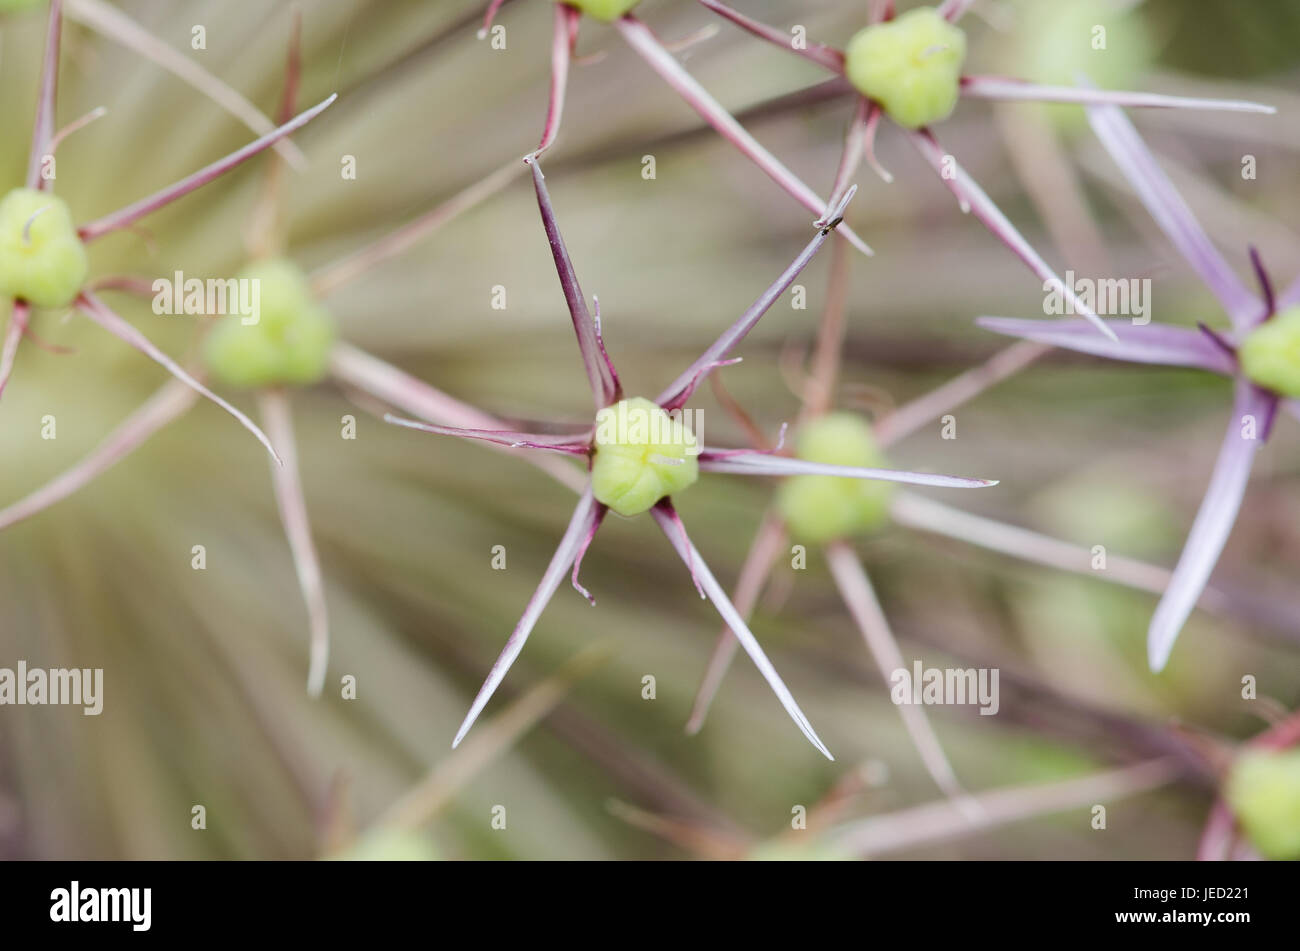 Alium Flower in extreme close up after flowering in abstract pattern Stock Photo